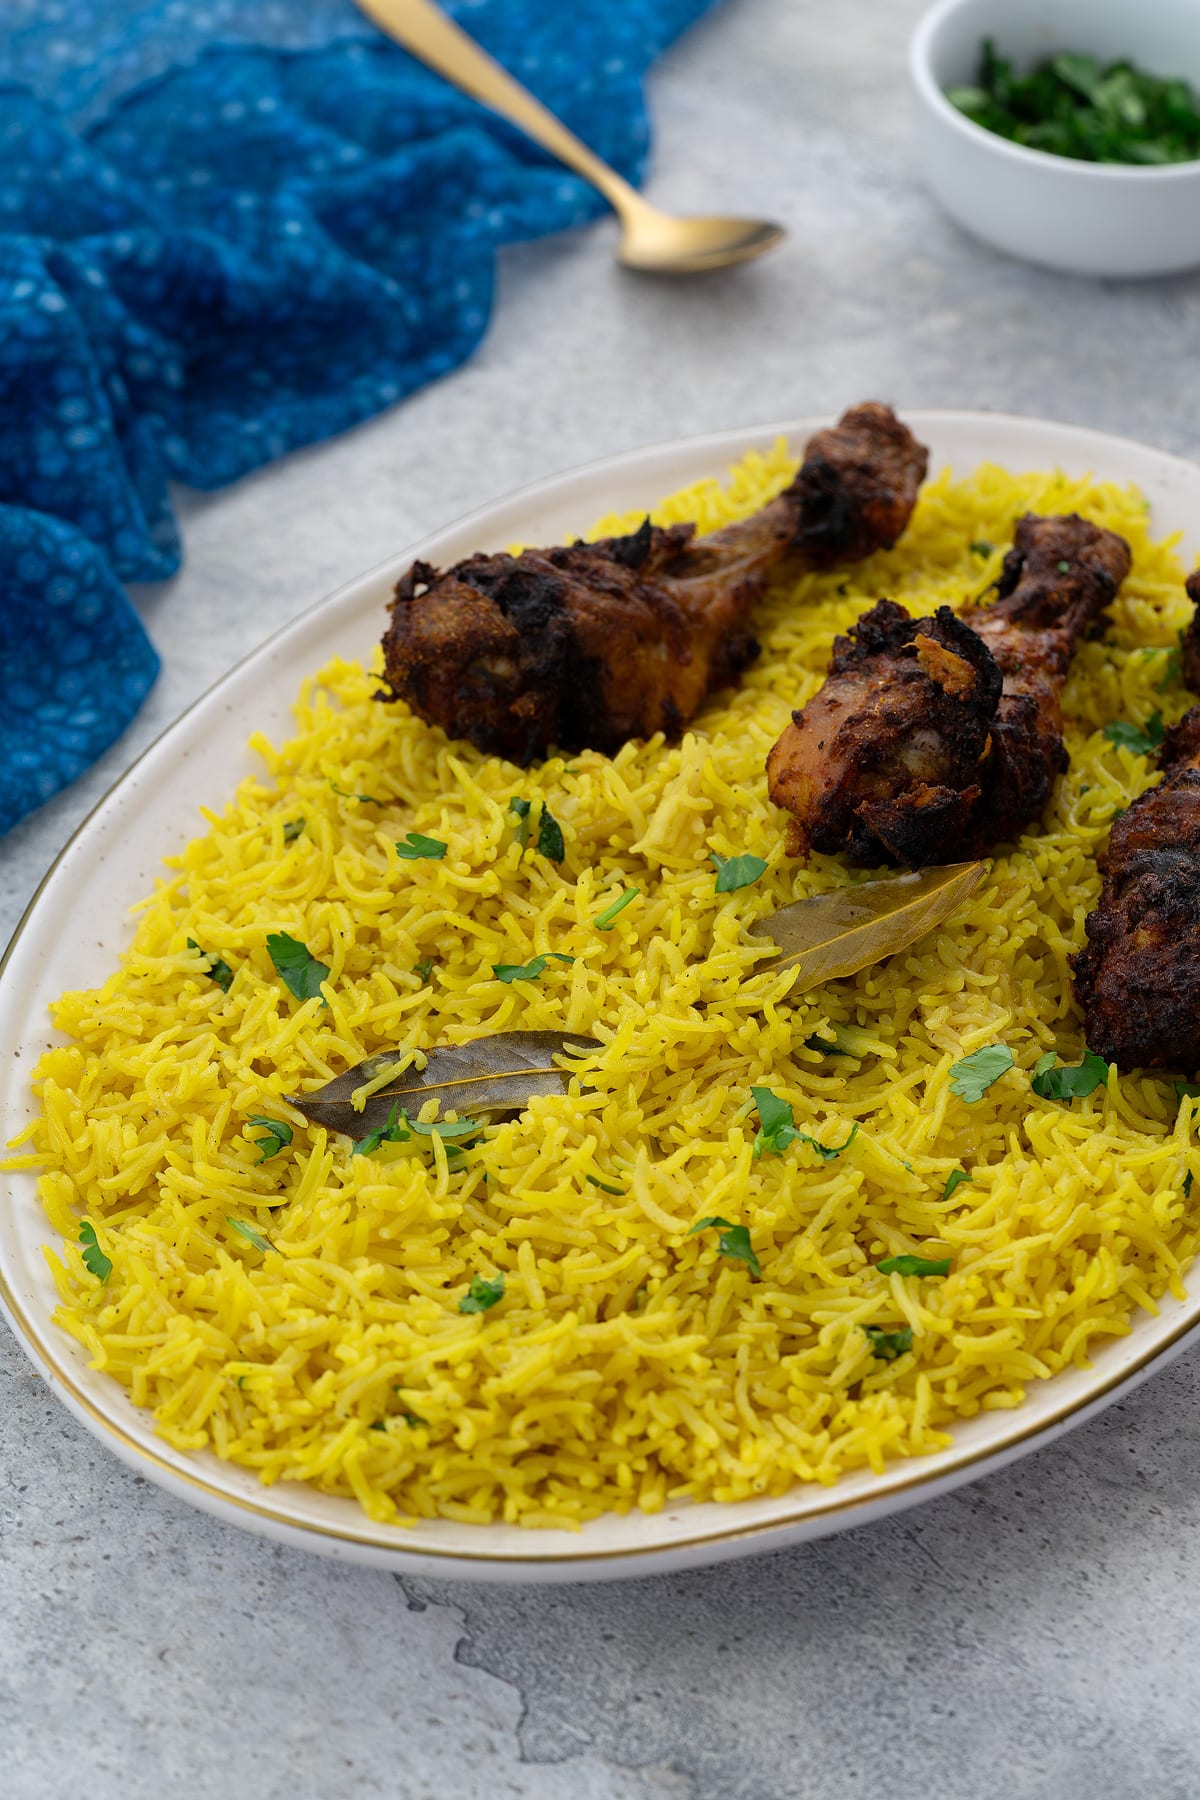 Yellow rice on an oval-shaped plate with chicken drumsticks. A blue towel, golden fork, and a cup of chopped cilantro leaves placed around.